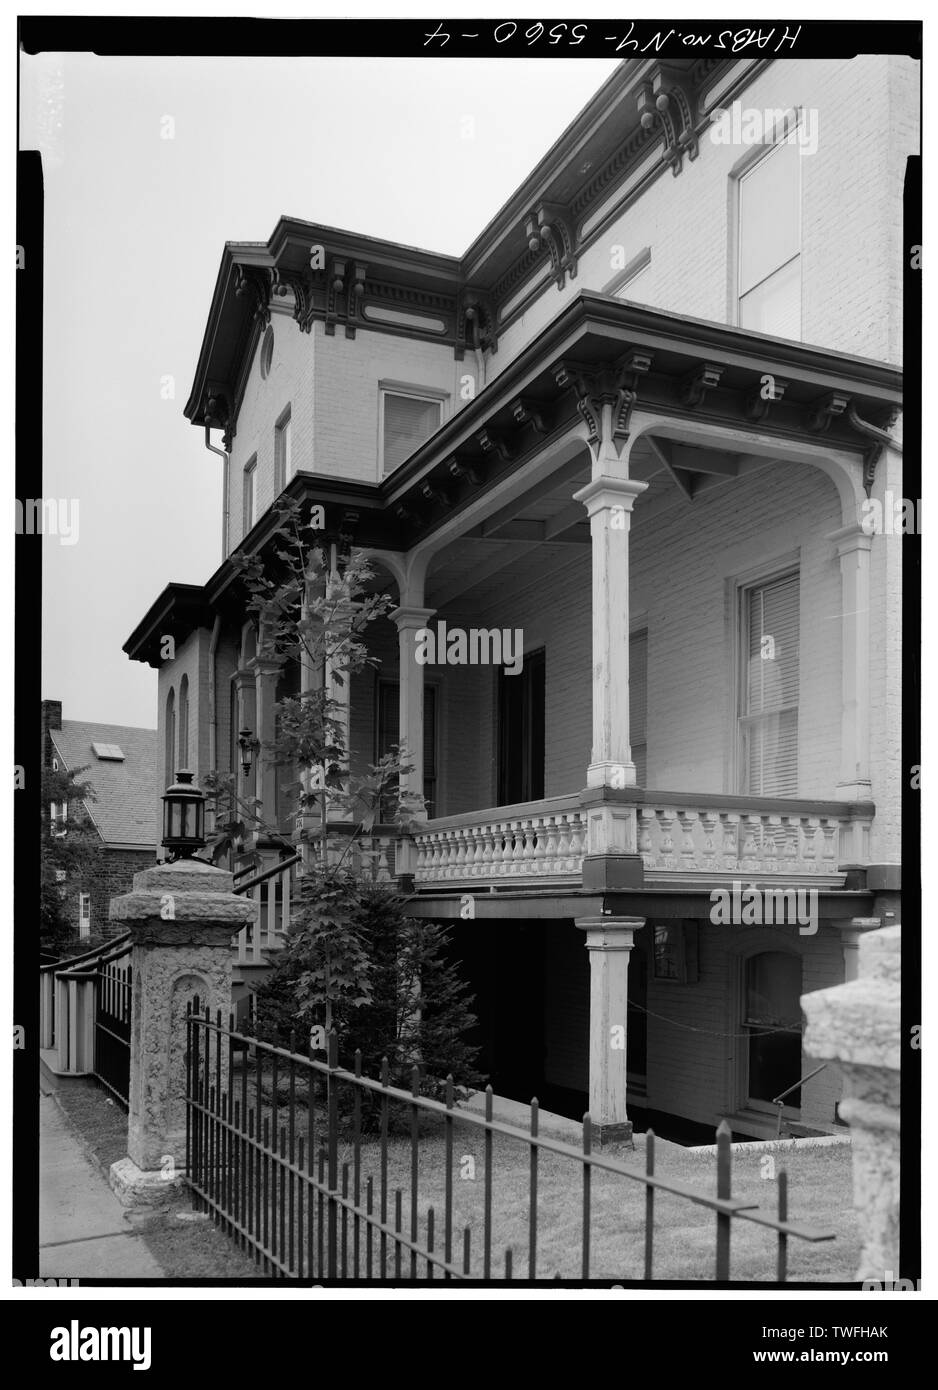 PORCH AND CORNICE DETAILS - Dr. Robert Loughran House, 296 Fair Street, Kingston, Ulster County, NY Stock Photo